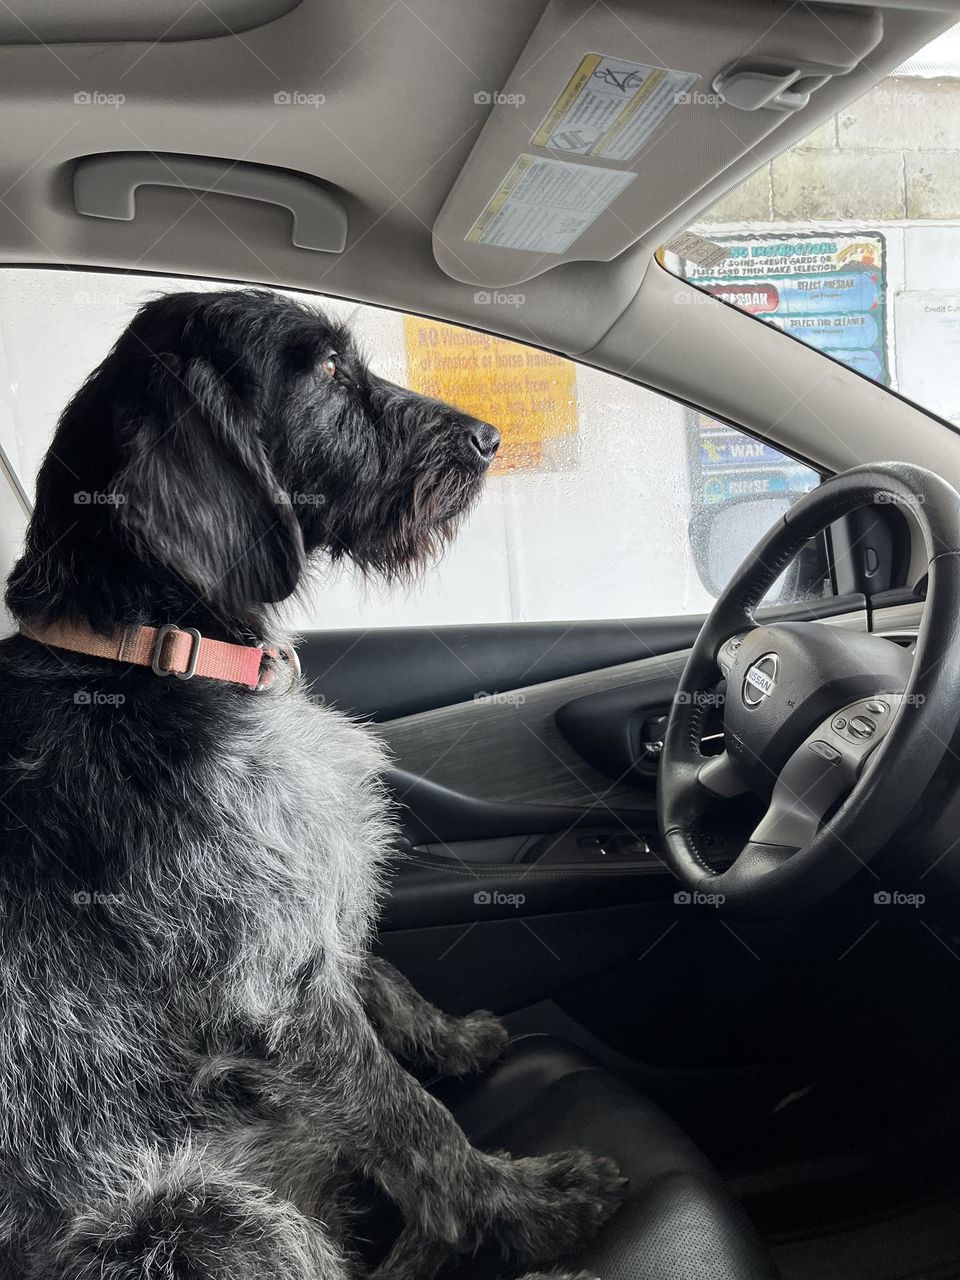 black roan german wirehaired pointer dog orange collar facing forward behind the wheel of a parked car